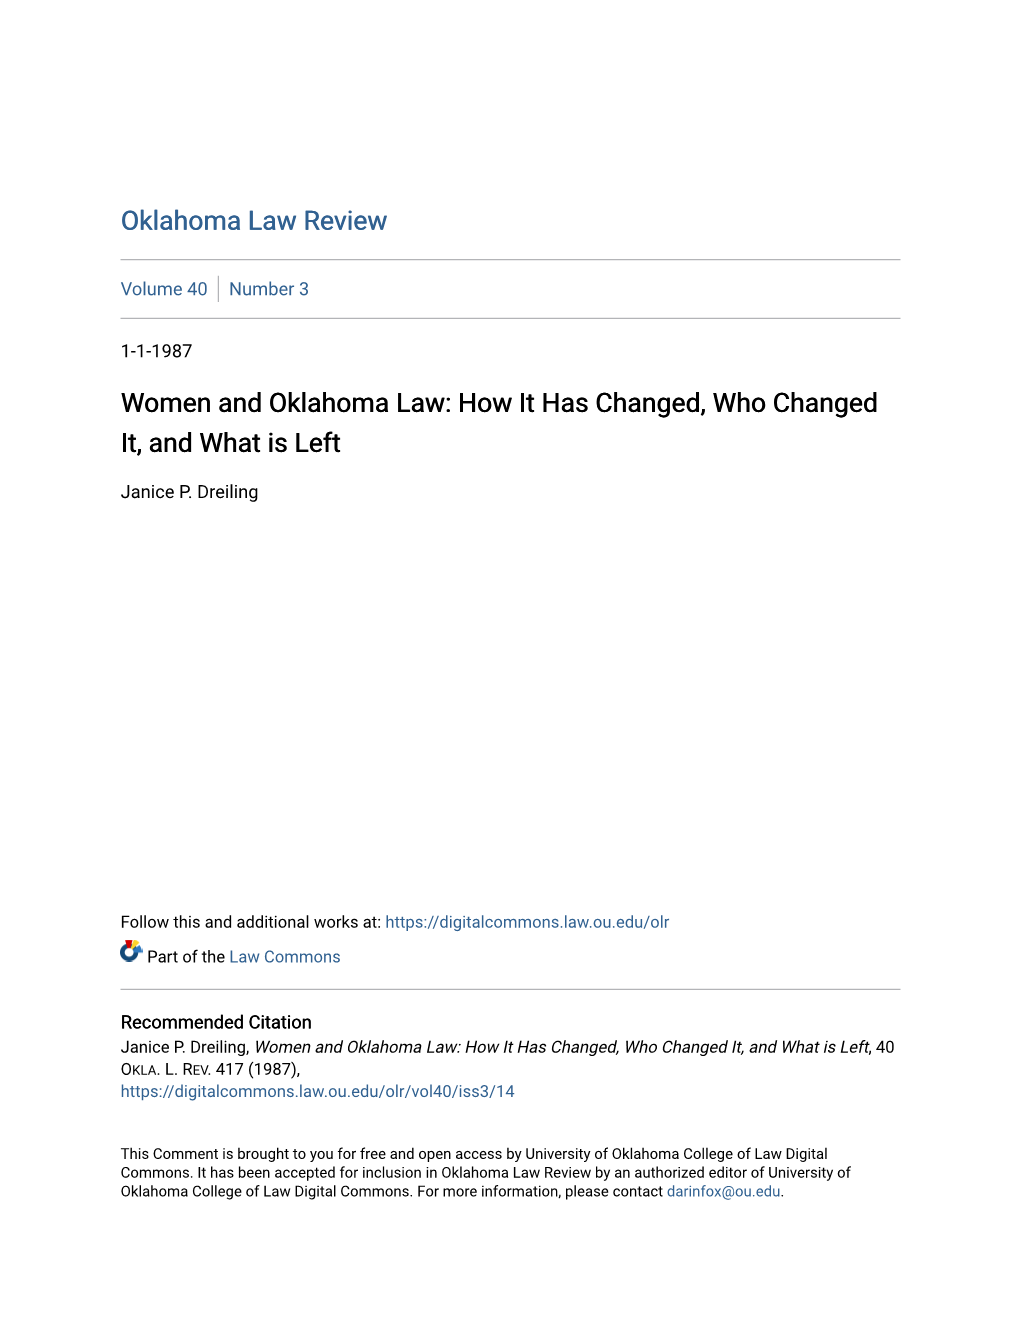 Women and Oklahoma Law: How It Has Changed, Who Changed It, and What Is Left